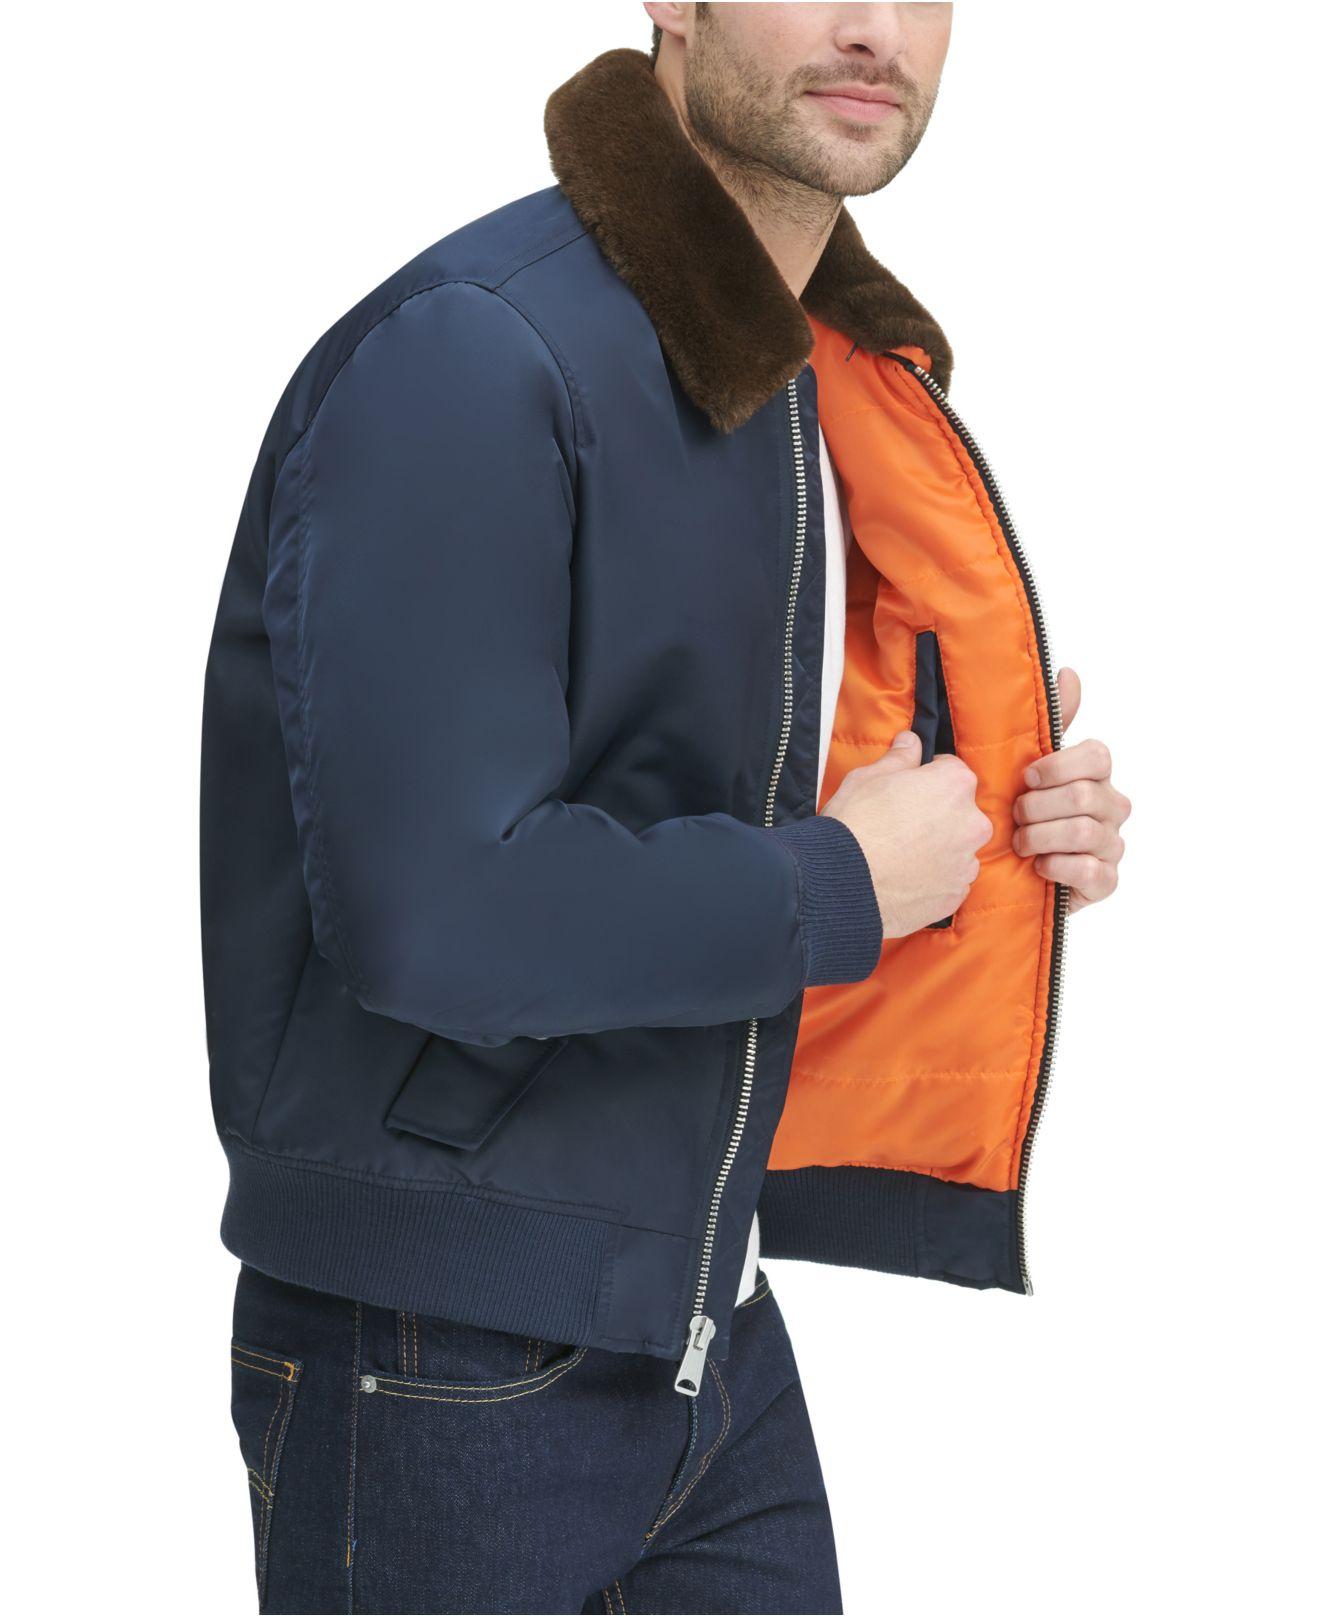 macy's tommy hilfiger bomber jacket Cheaper Than Retail Price> Buy  Clothing, Accessories and lifestyle products for women & men -